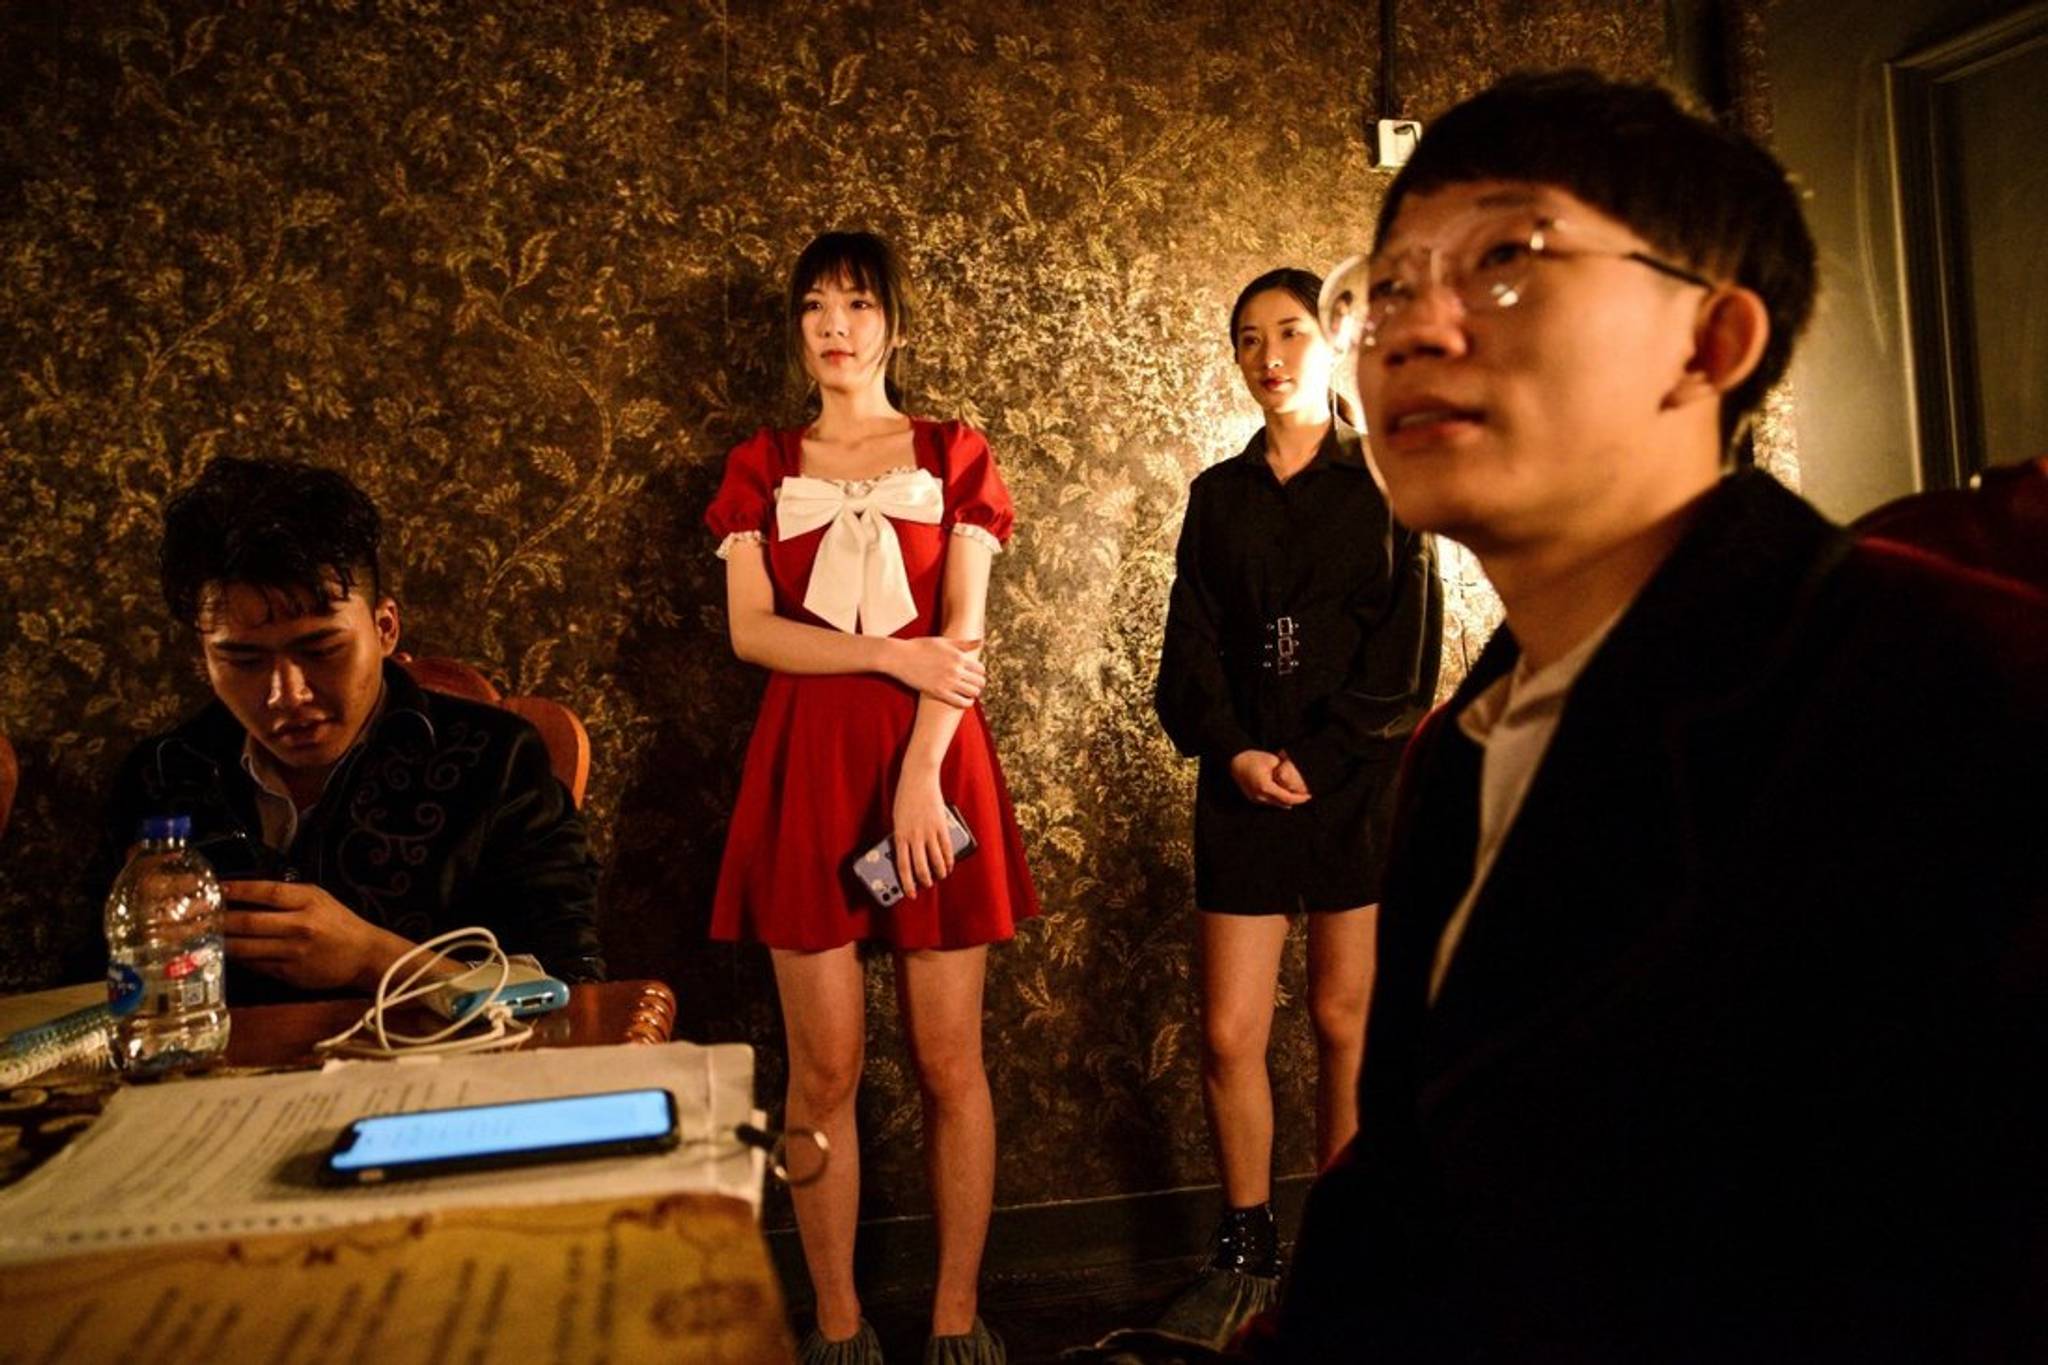 Chinese Gen Zers meet for murder mystery game